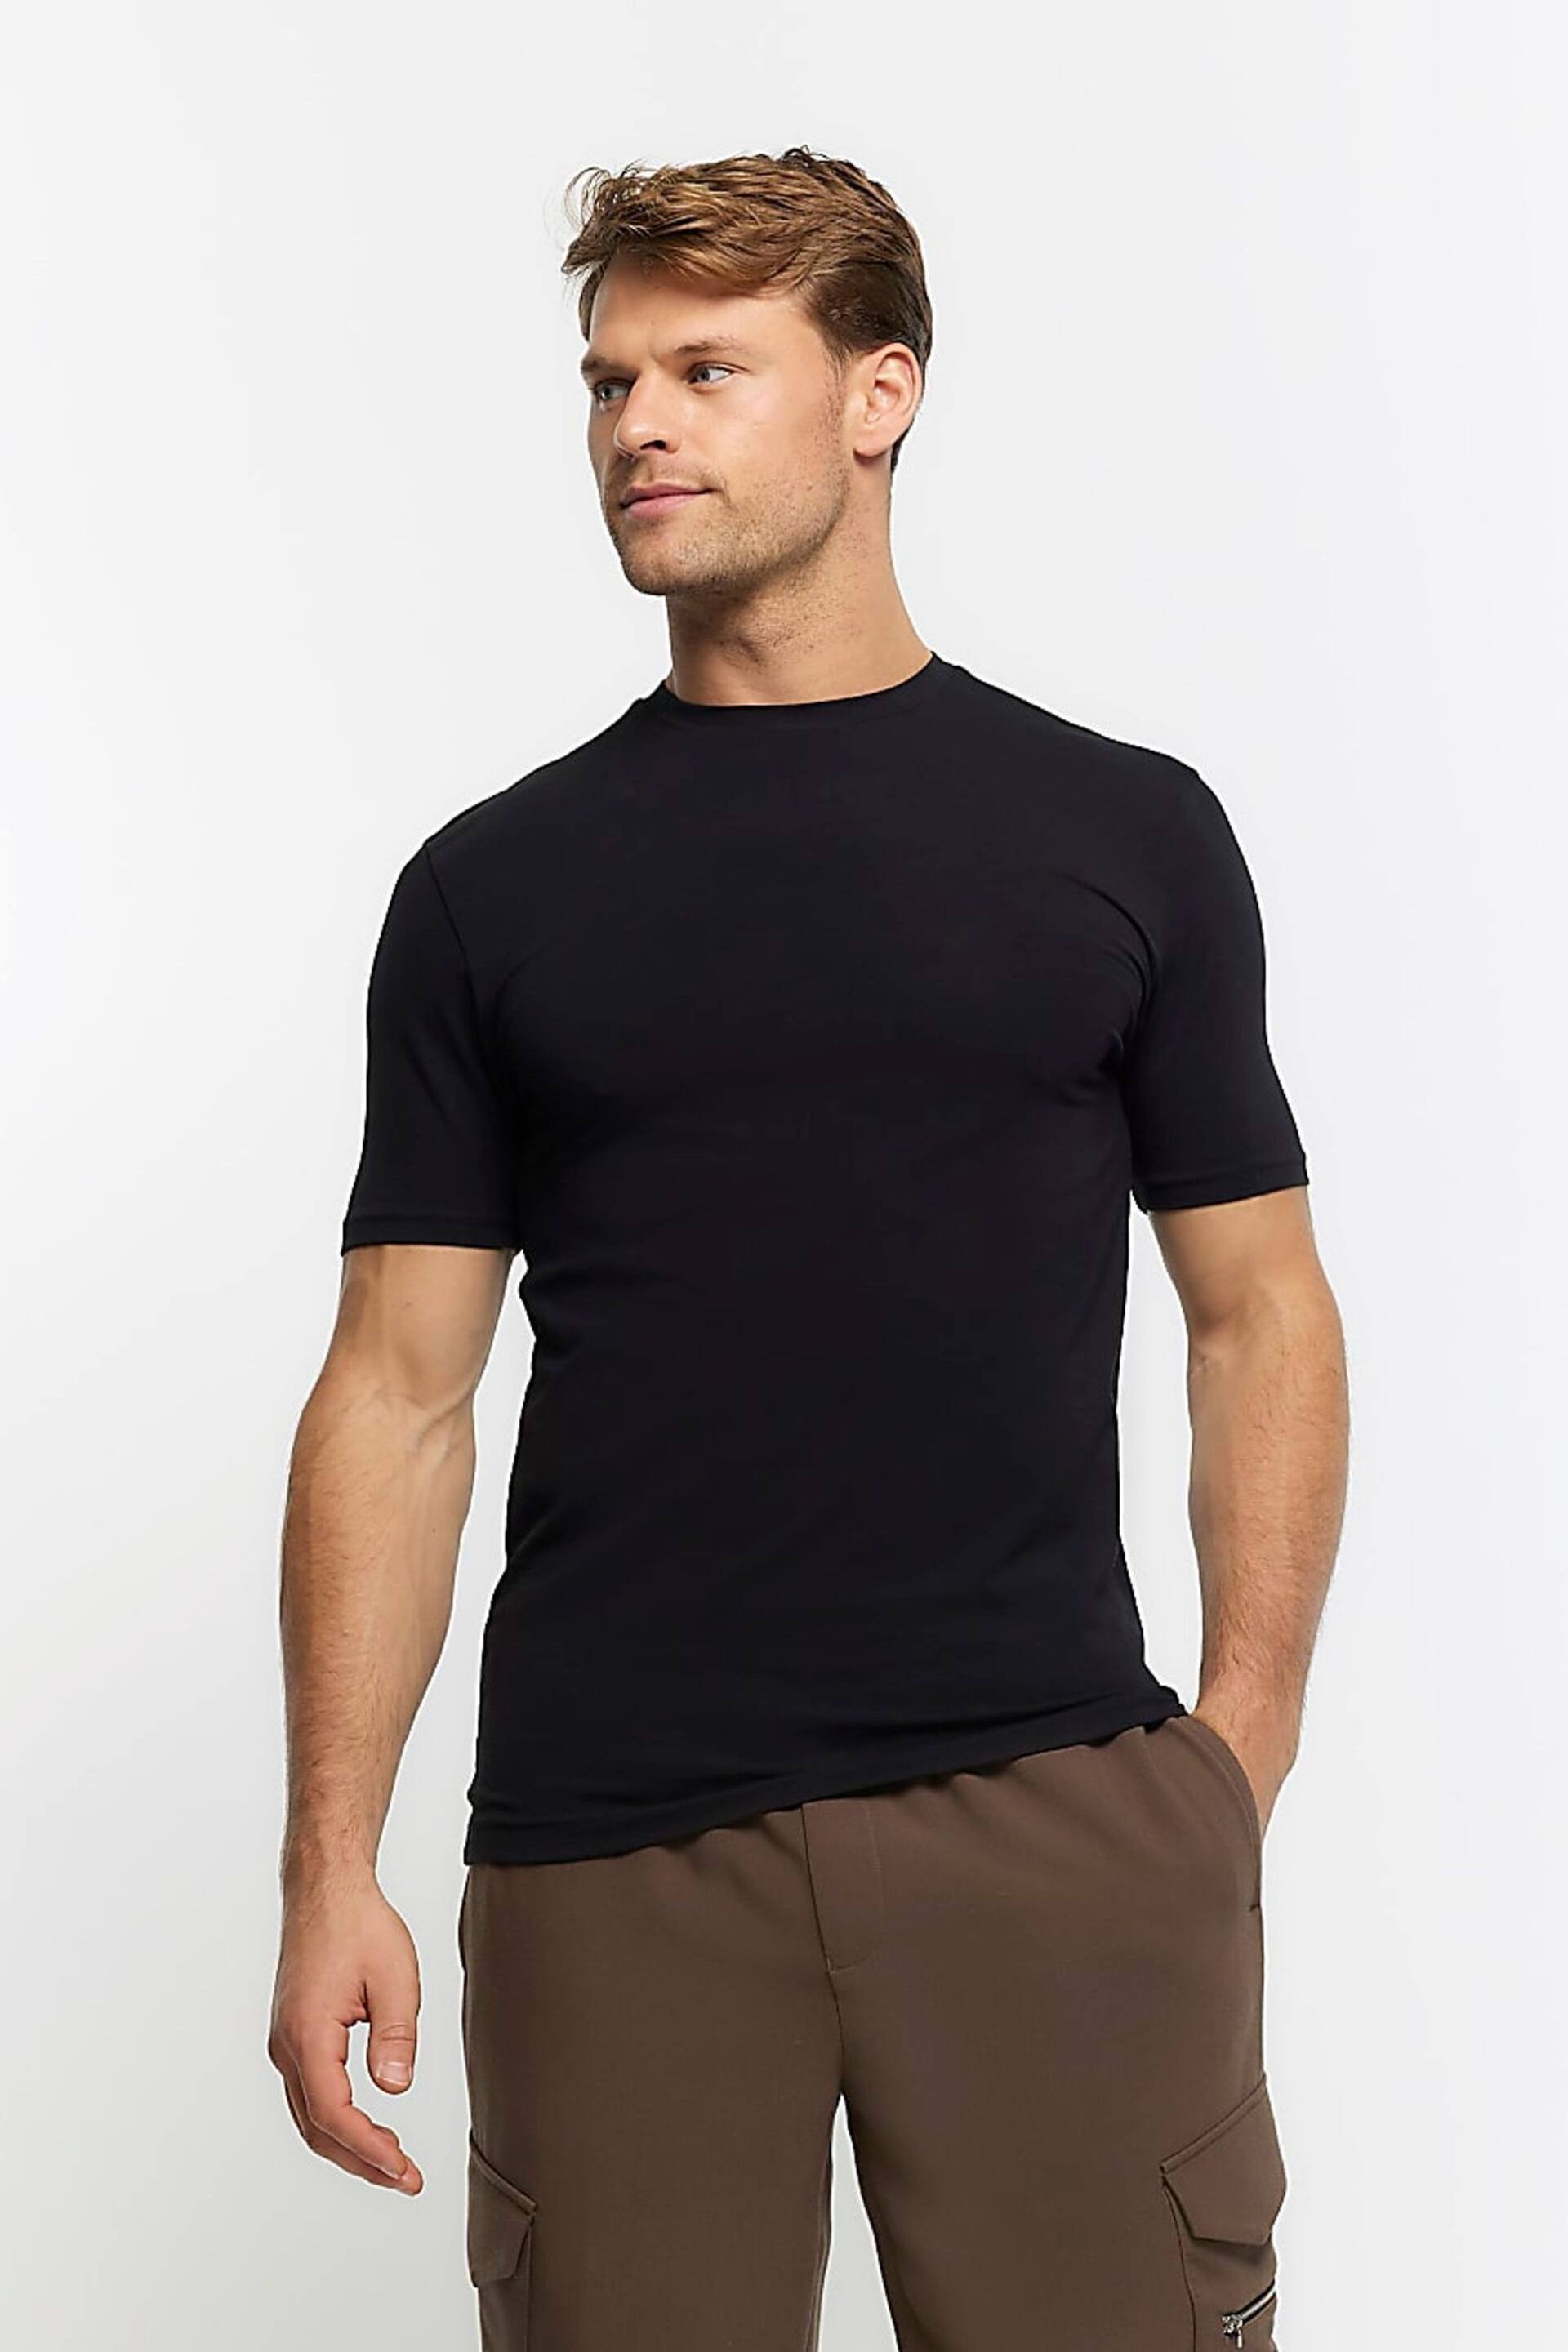 River Island Black Muscle Fit Brick T-Shirt - Image 1 of 3